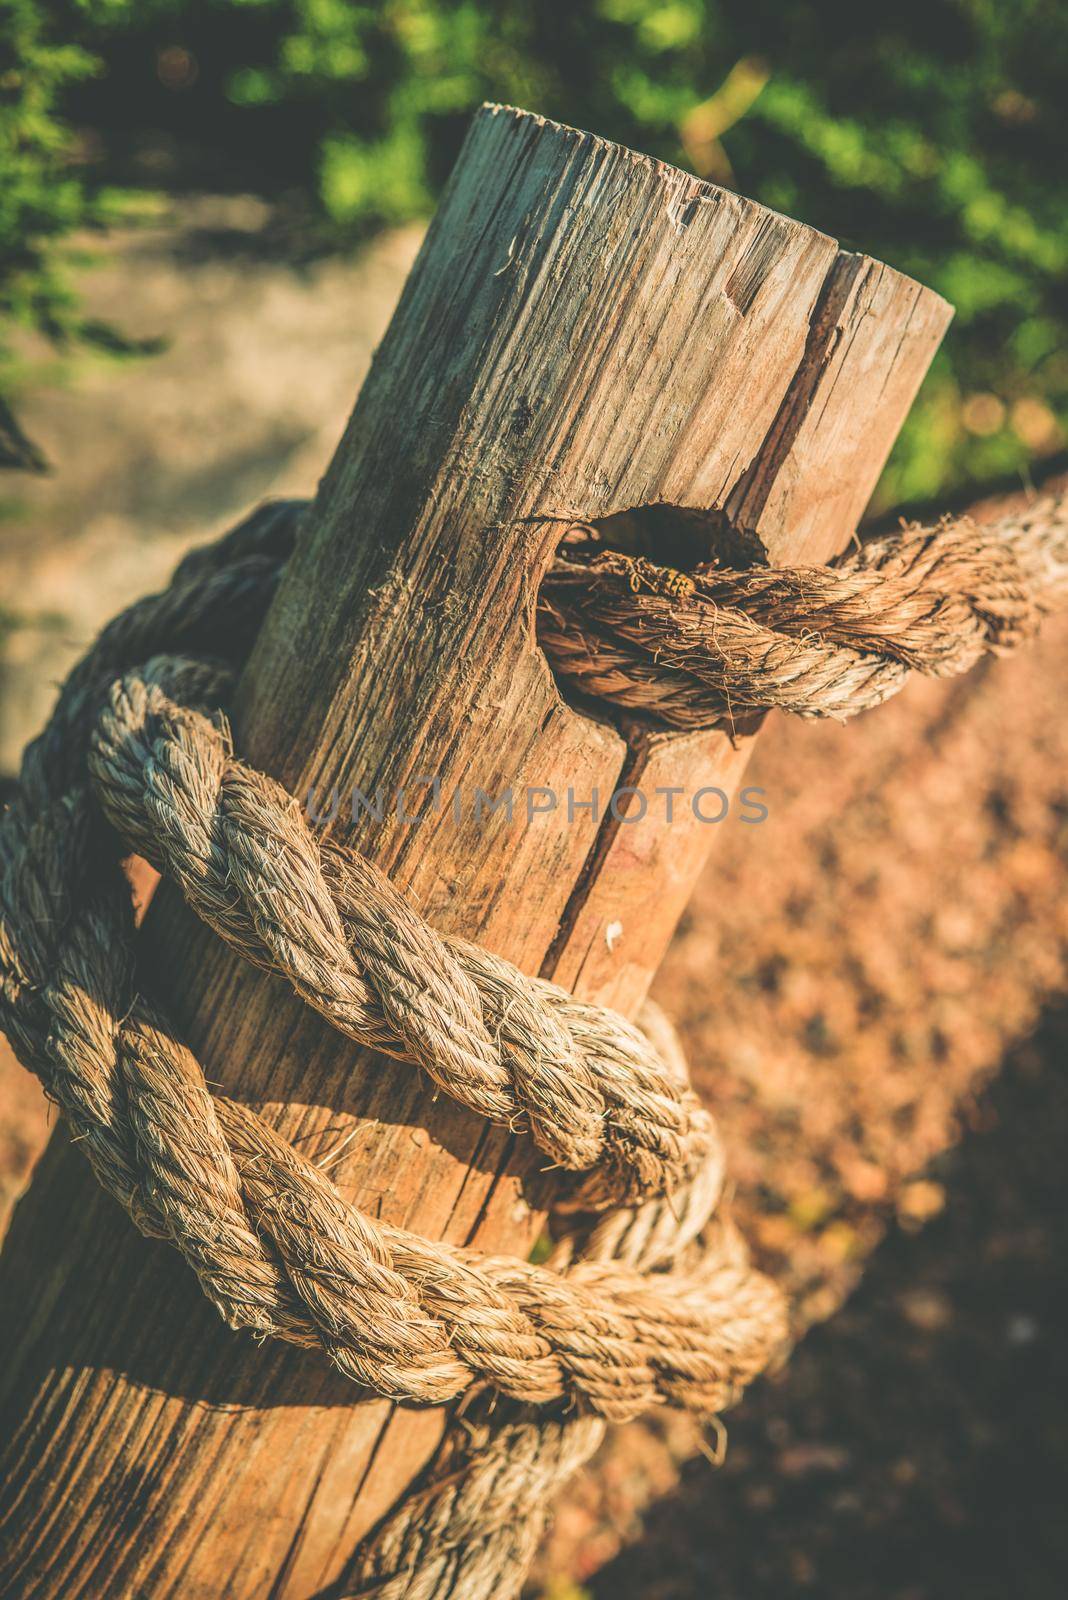 Rope and Wood. Wooden Pole and Rope. Part of Decorative Garden Fence.